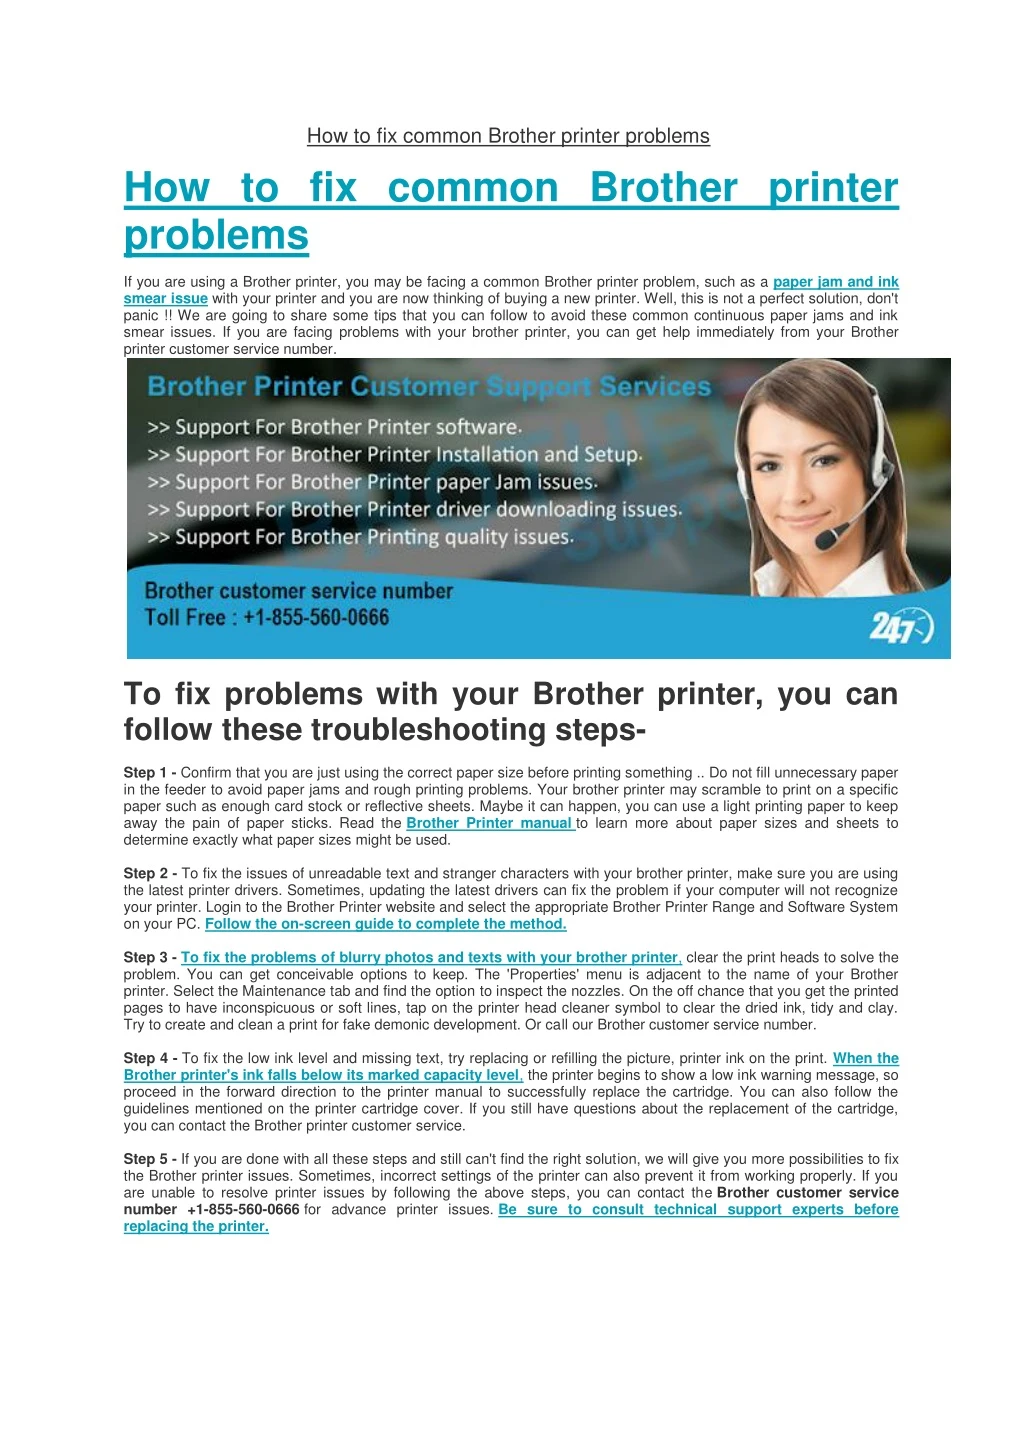 how to fix common brother printer problems